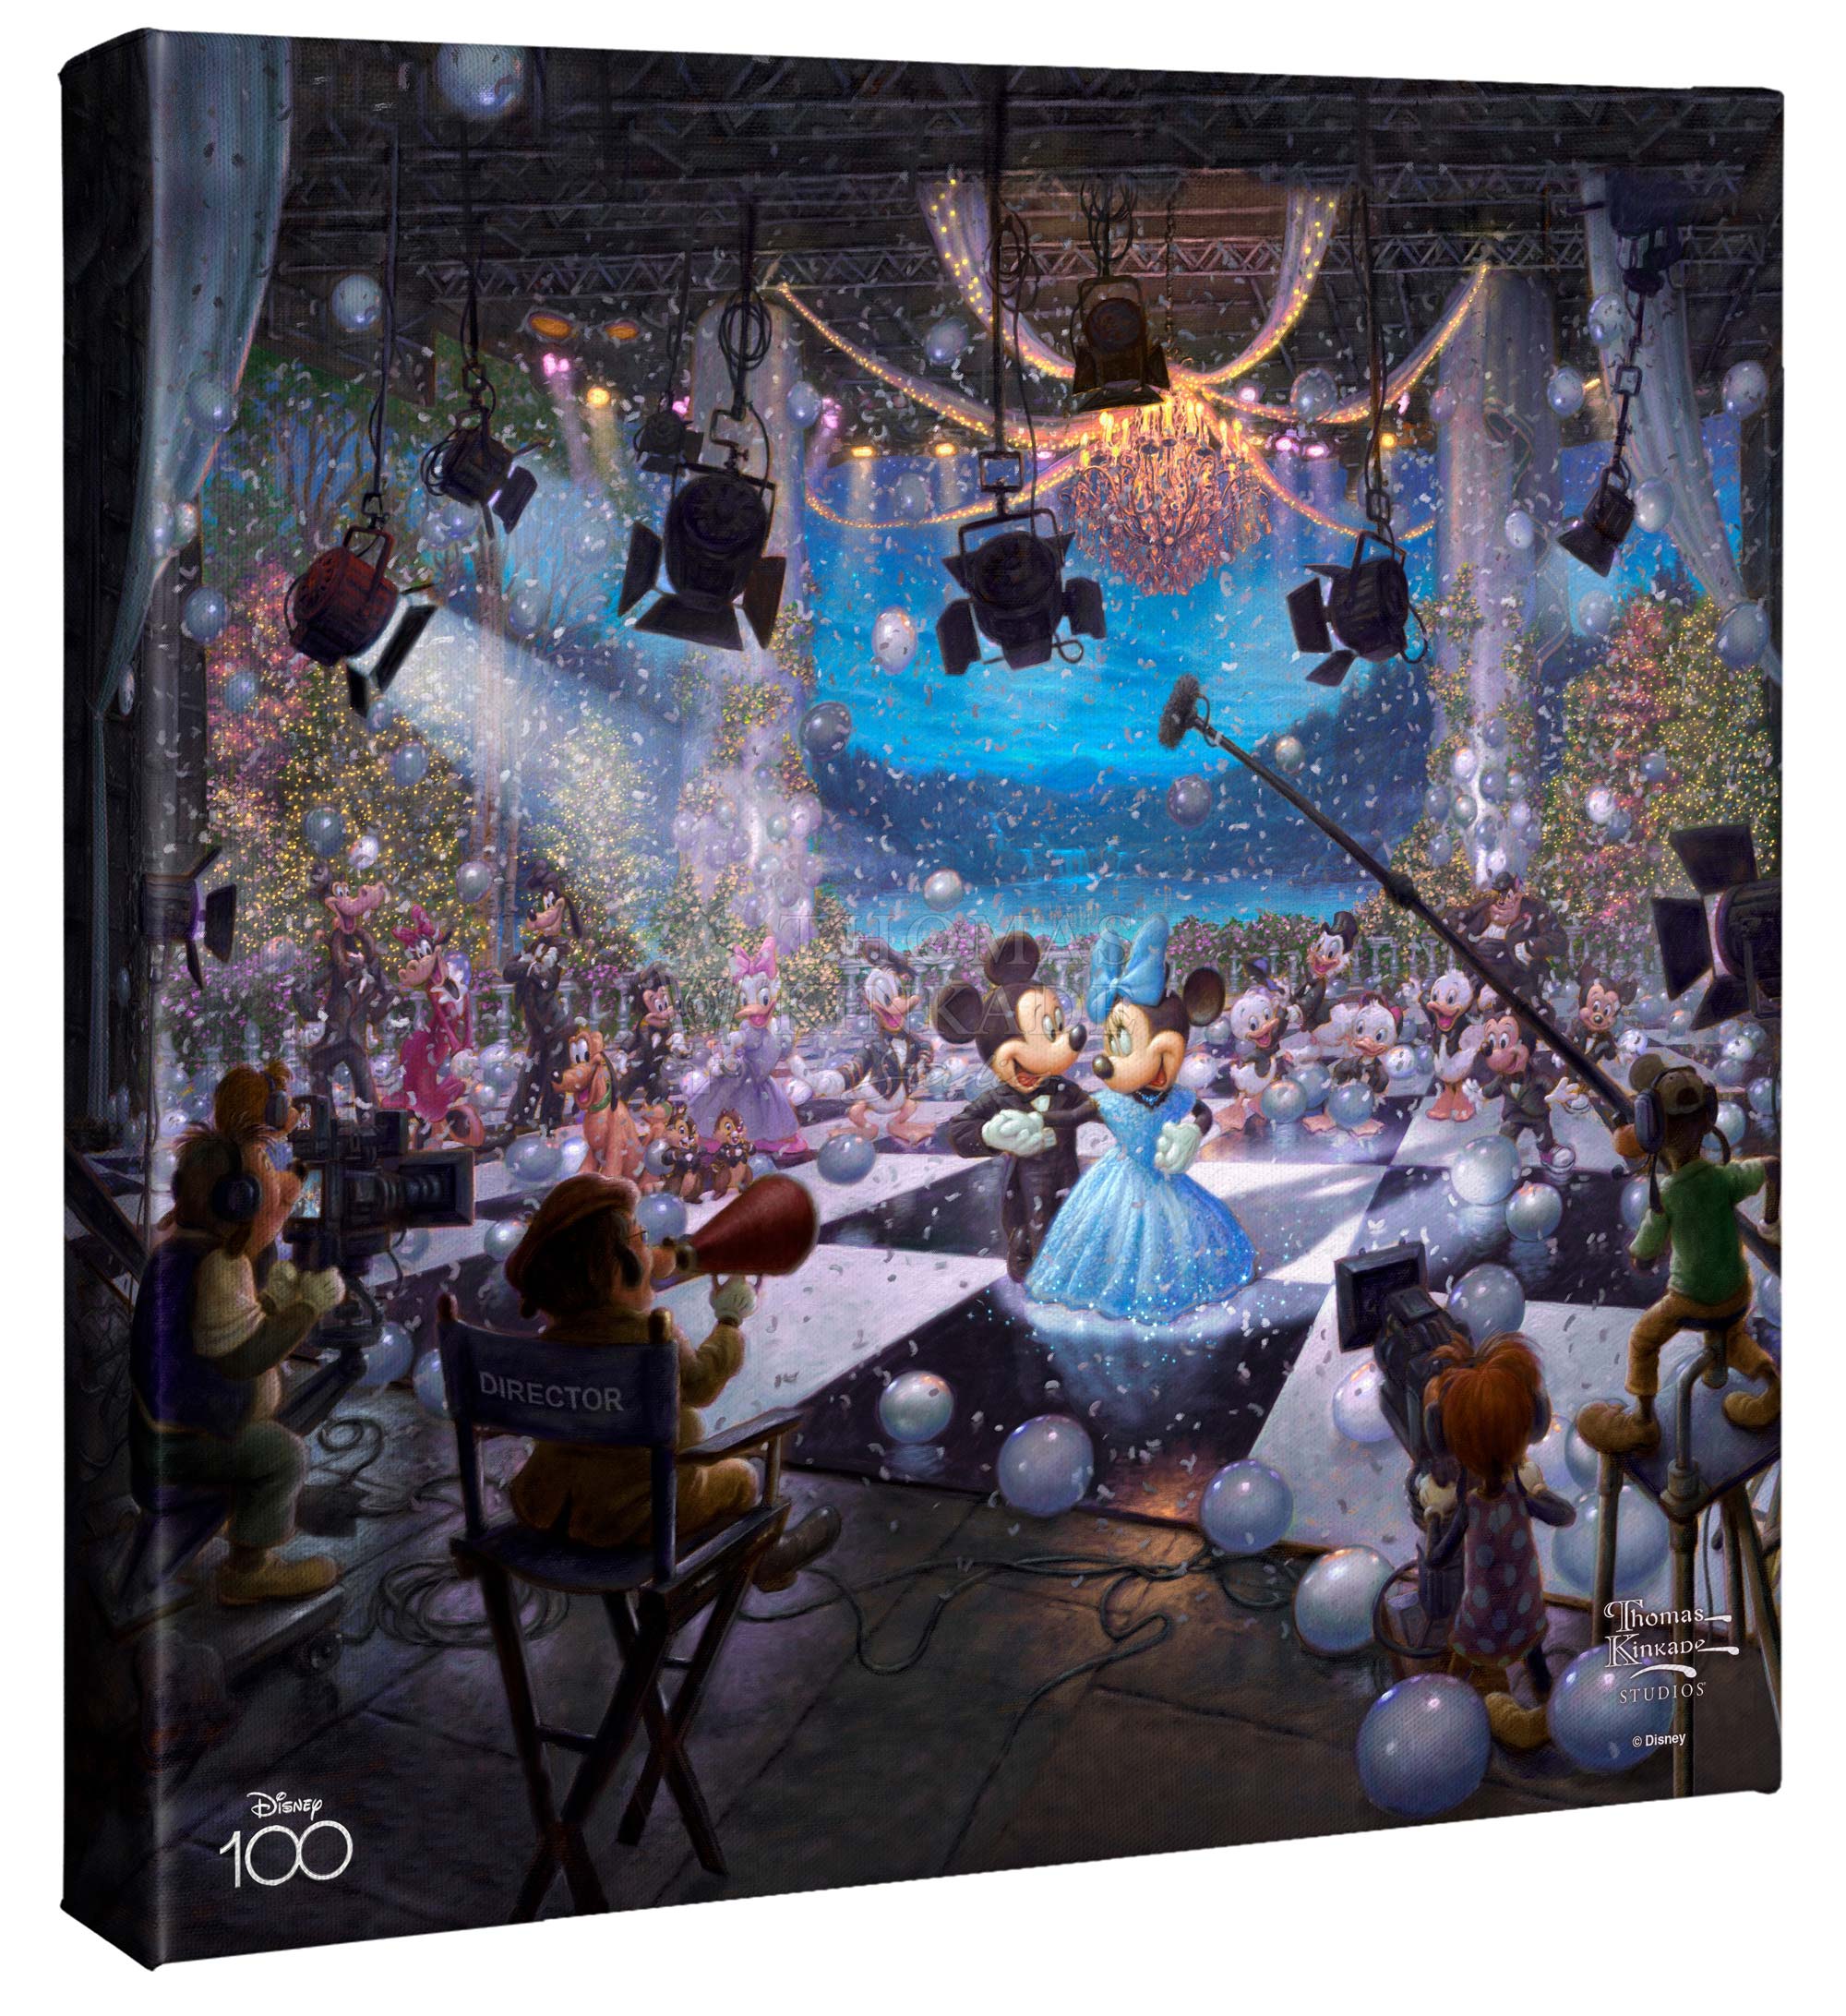 Disney 100th Clelebration - 14" x 14" Gallery Wrapped Canvas